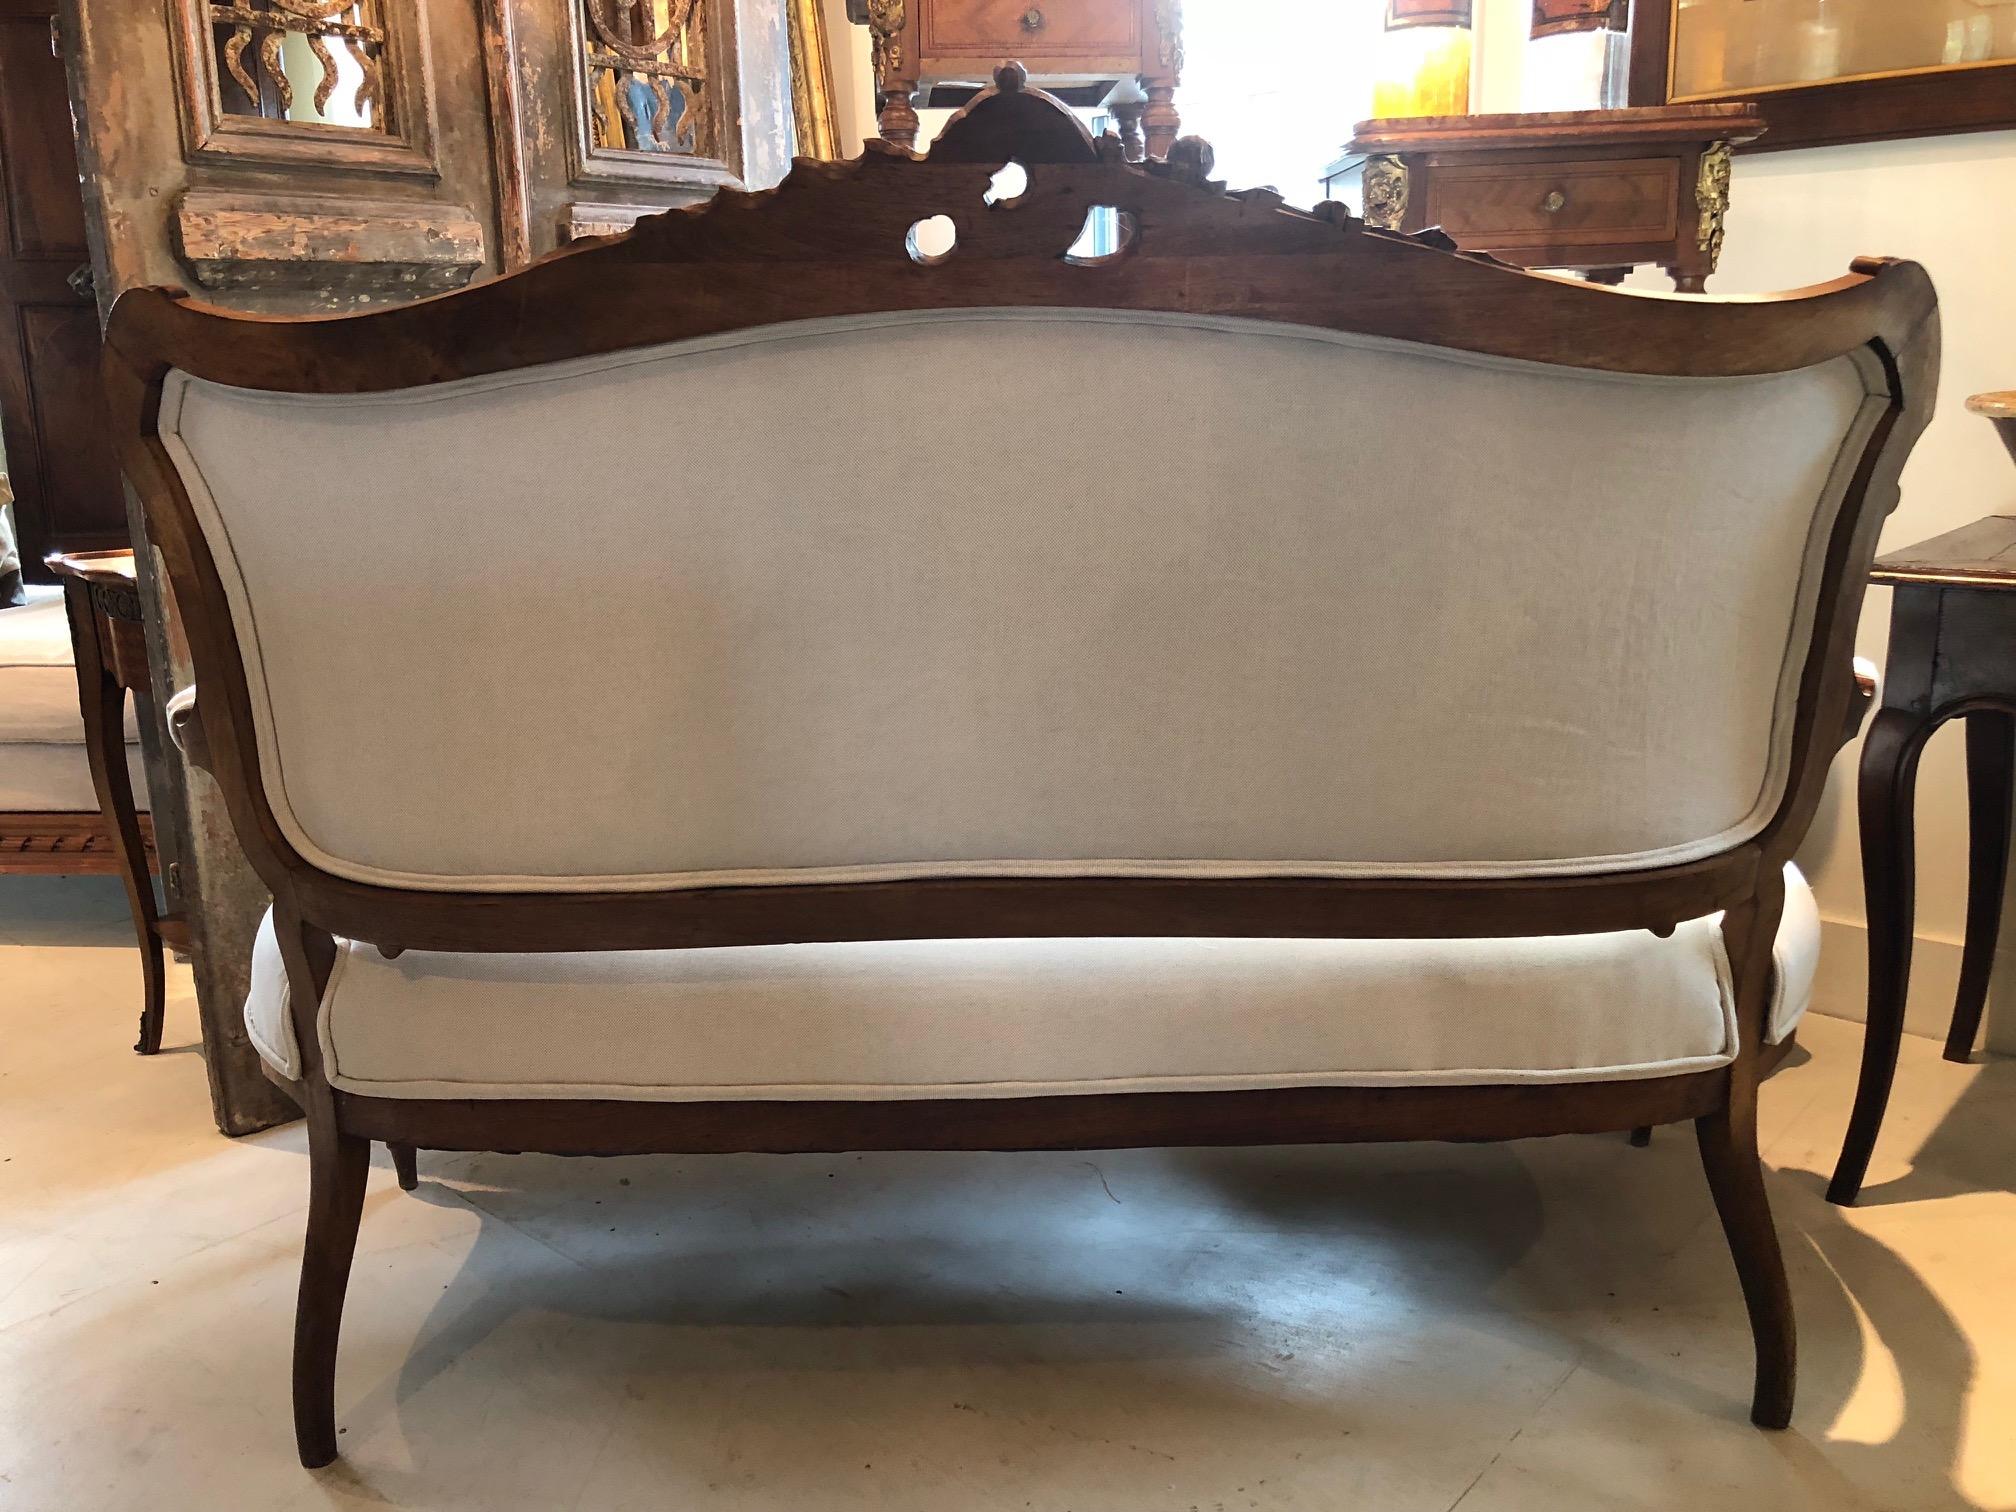 Sublimely Elegant Early French Carved Wood Sofa with New Upholstery (Französisch)